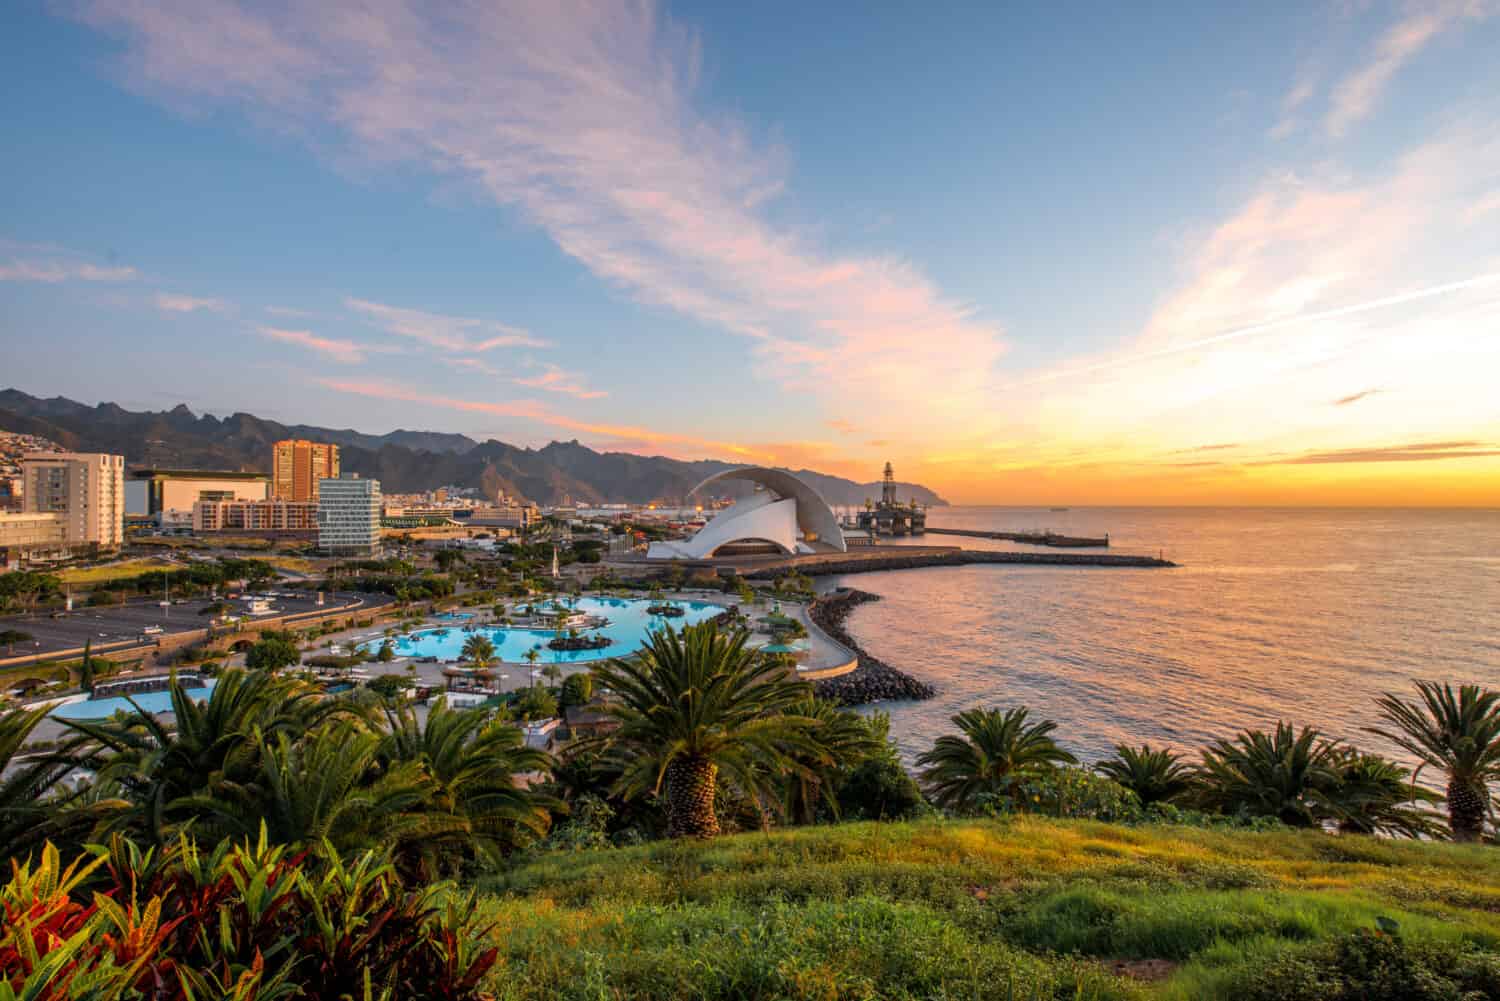 Santa Cruz cityscape view with park, ocean and mountains on the background on the sunrise, Canary islands, Spain